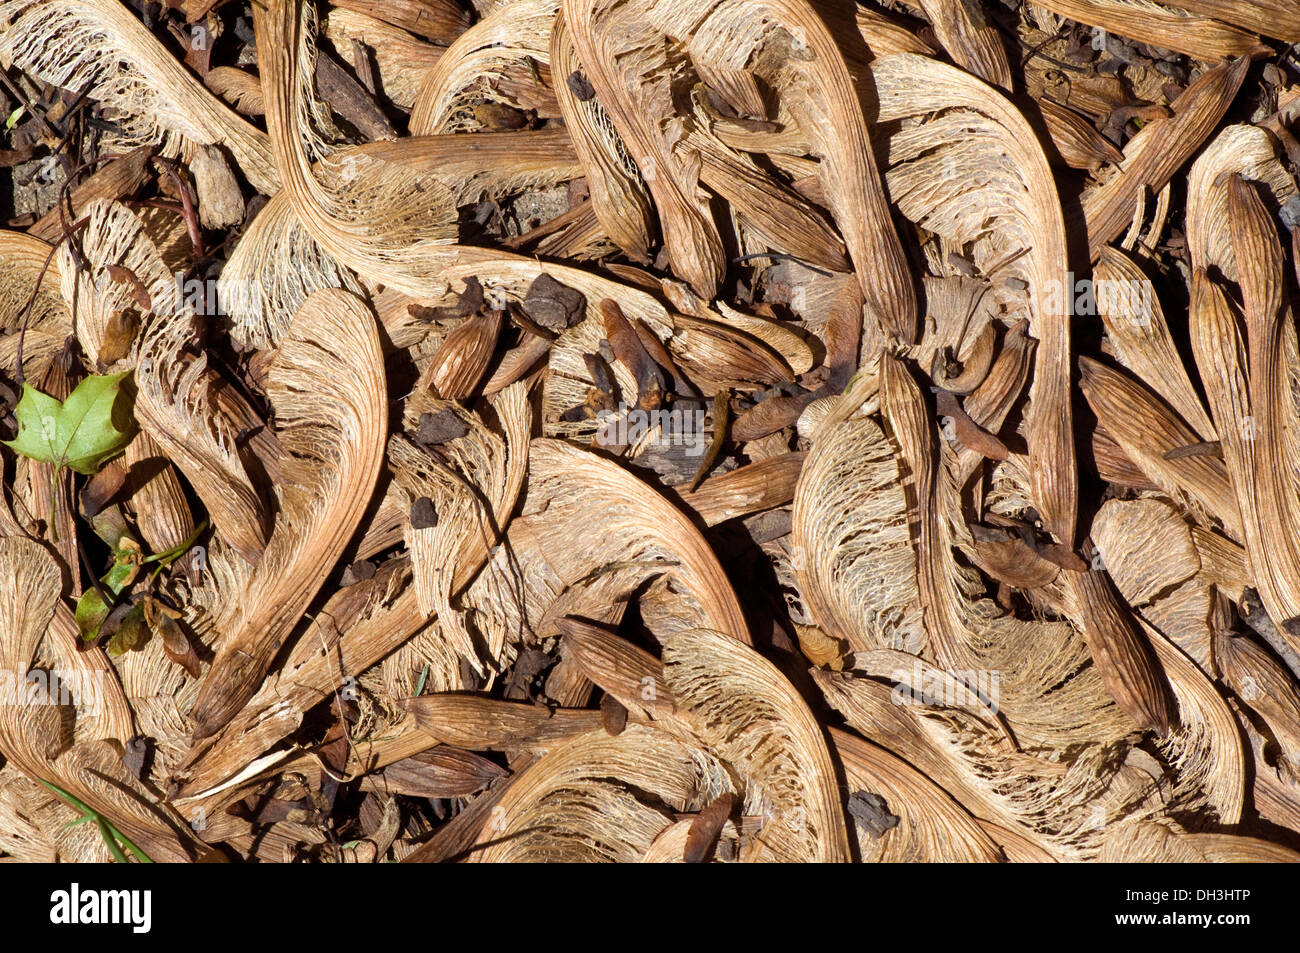 Macro photography of storm debris in the form of fallen Maple seeds, Chicago, Illinois, USA. Stock Photo